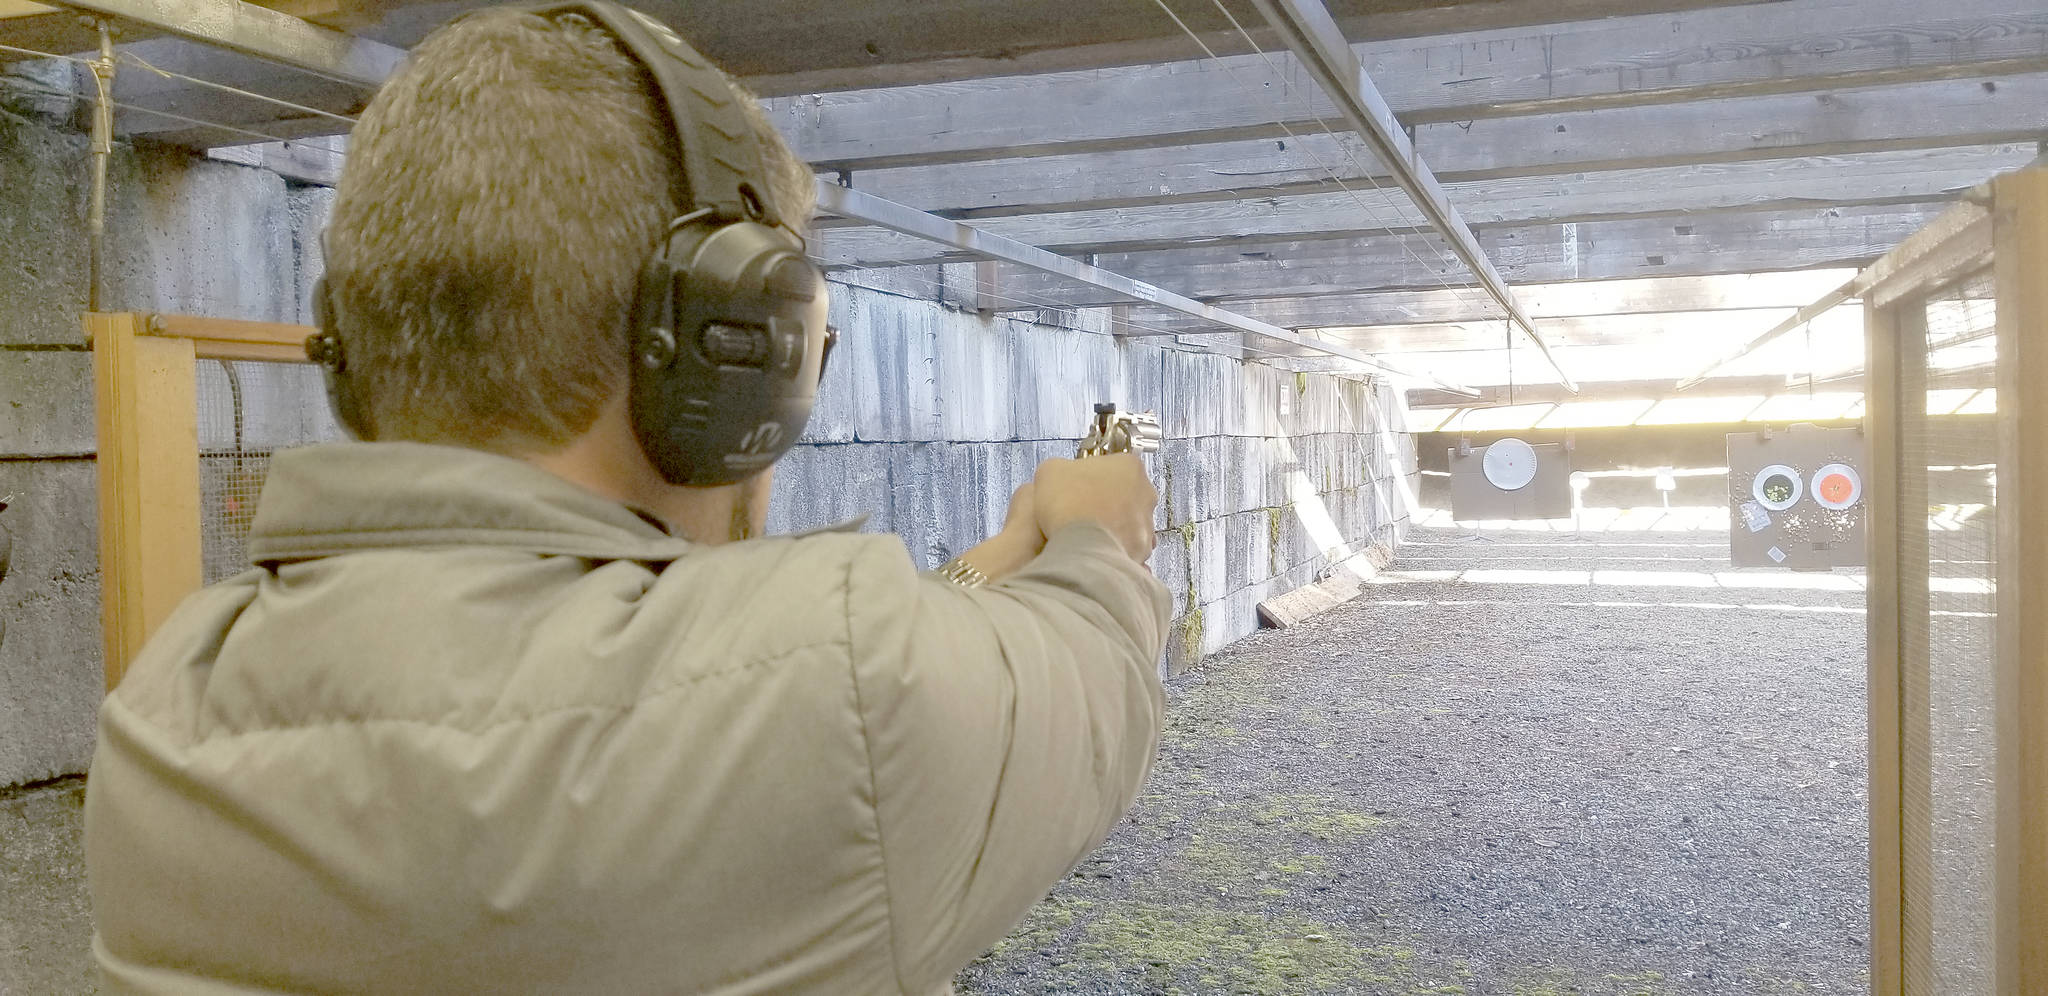 As more concealed carry permits are issued, firearms instructors concerned over lack of training